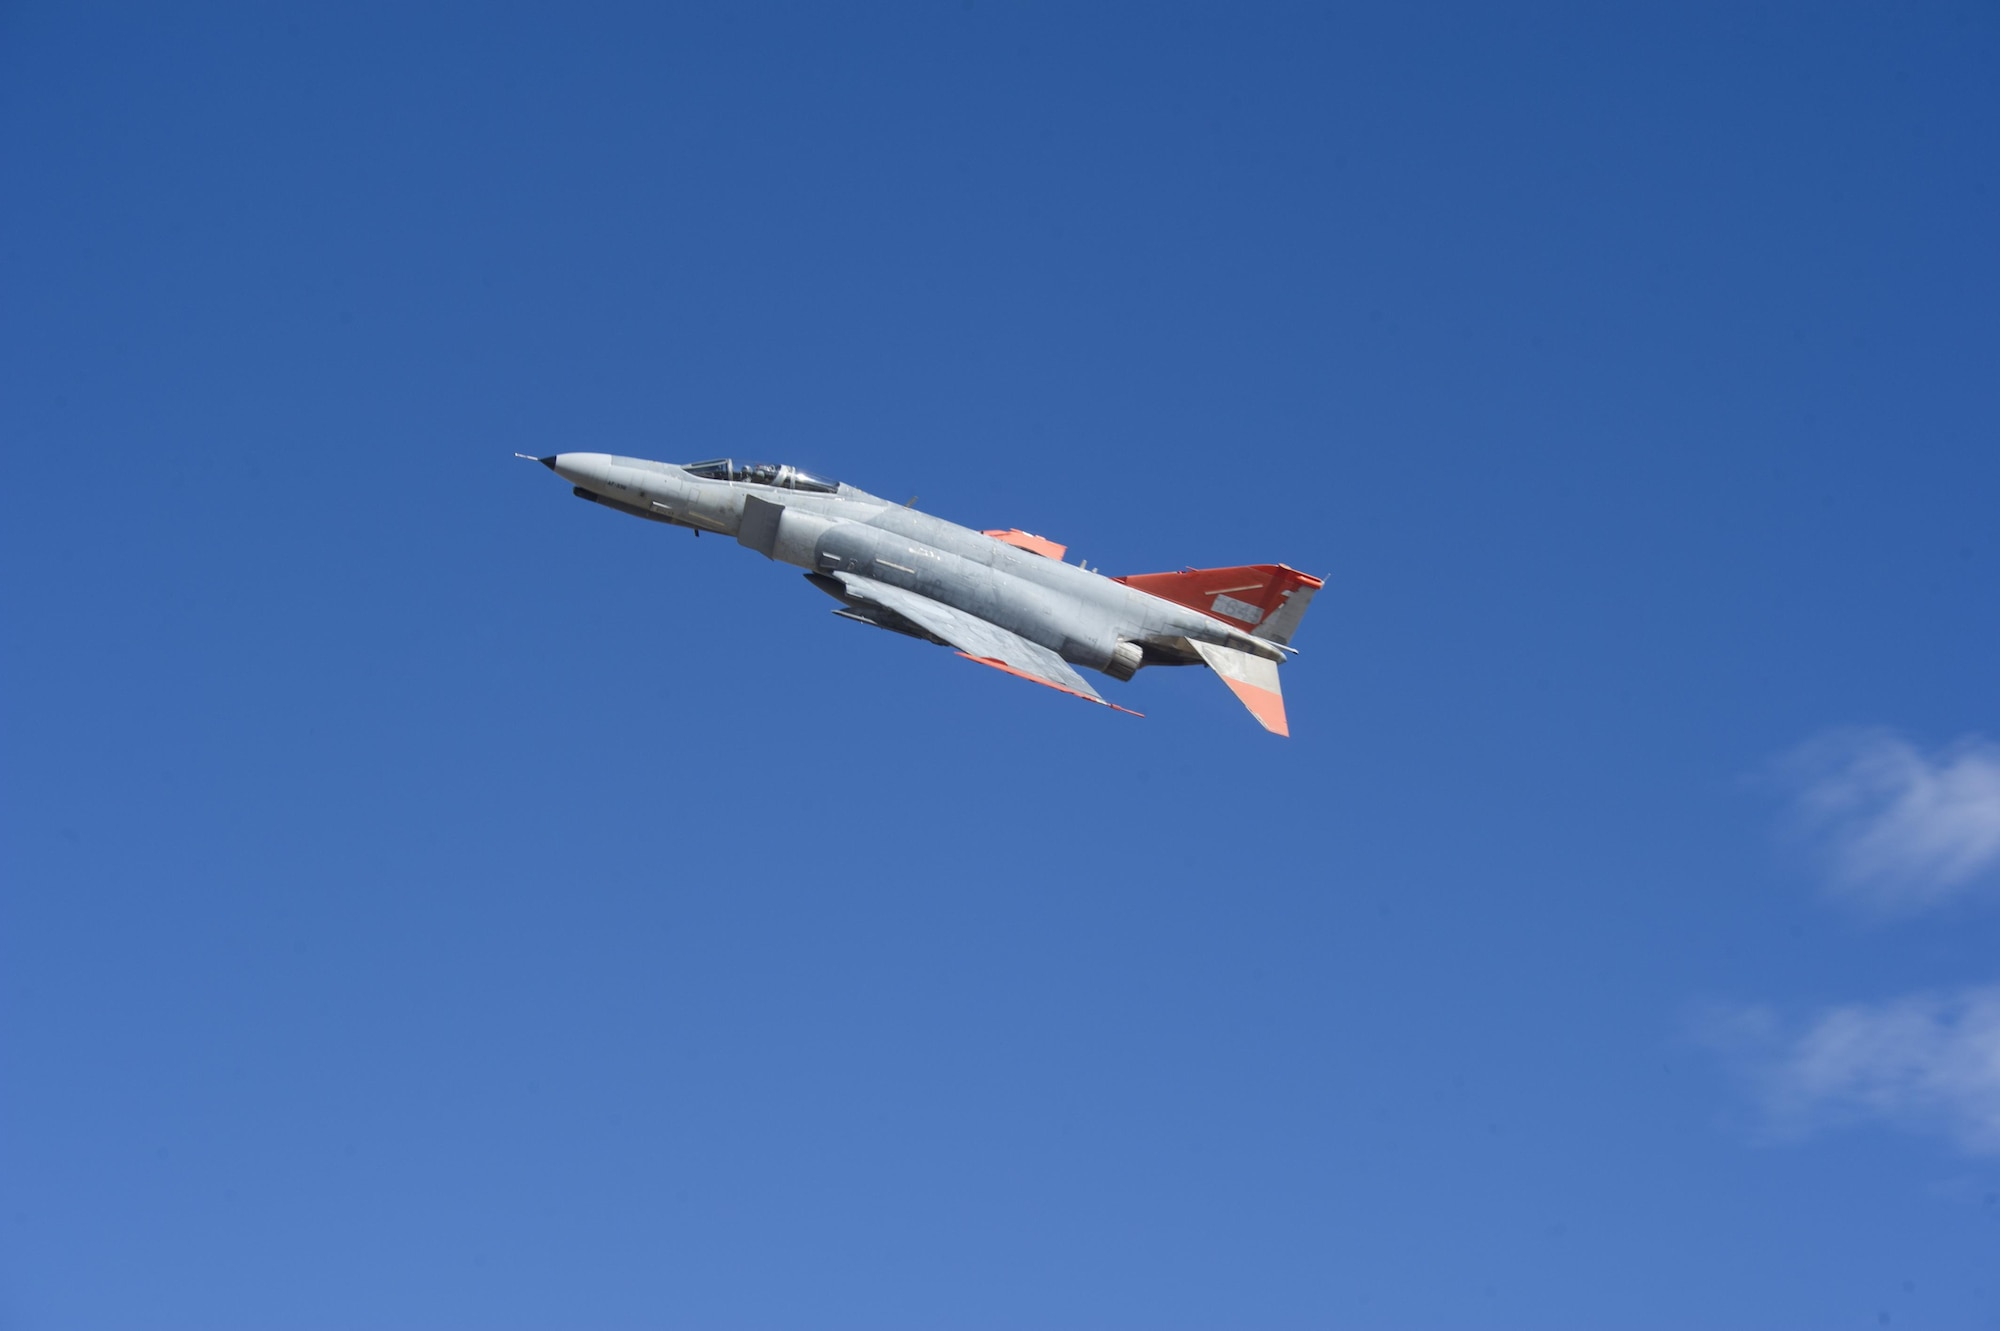 A QF-4 Phantom II departs Holloman Air Force Base, N.M. on Sept. 13, 2016, in front of 160 spectators participating in Holloman’s annual Phantom Society Tour. The tour enabled aircraft enthusiasts, including veterans and non-veterans with aviation backgrounds, to learn more about Holloman AFB’s aircraft and mission. The tour included an F-16 Fighting Falcon static display and briefing, travel to Holloman’s High Speed Test Track, the opportunity to view QF-4 Phantom IIs and F-16s in flight, and a visit to the base’s heritage park to view static displays of various aircraft historically stationed at Holloman AFB. (U.S. Air Force photo by Master Sgt. Matthew McGovern)